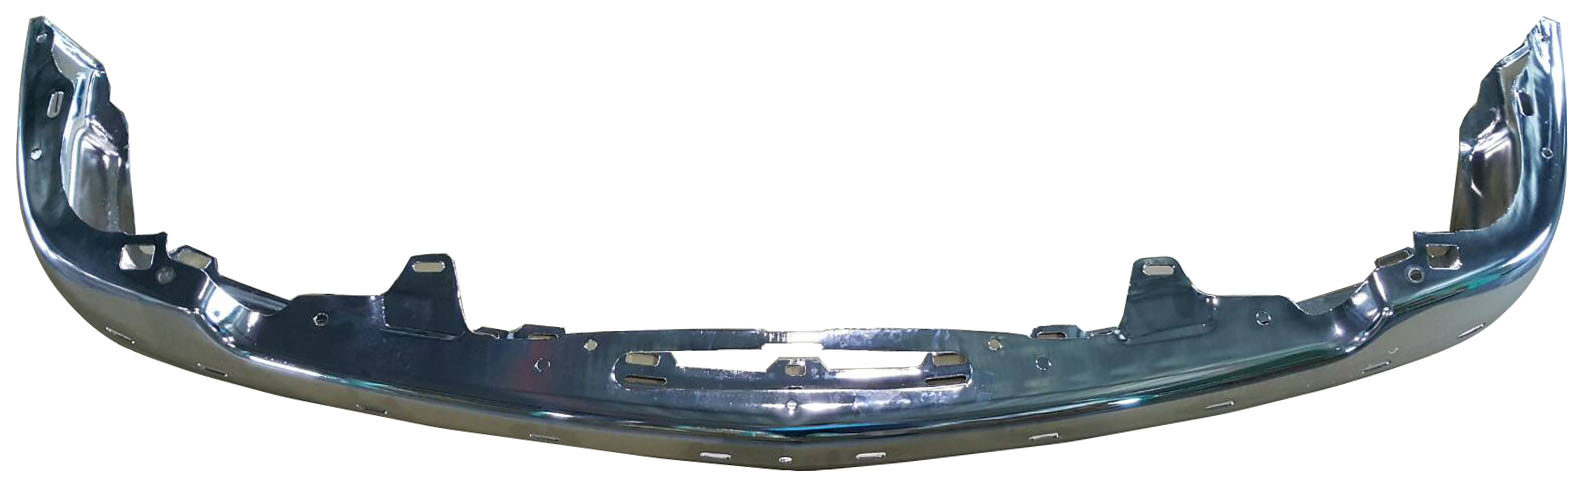 Aftermarket METAL FRONT BUMPERS for CHEVROLET - S10, S10,98-04,Front bumper face bar